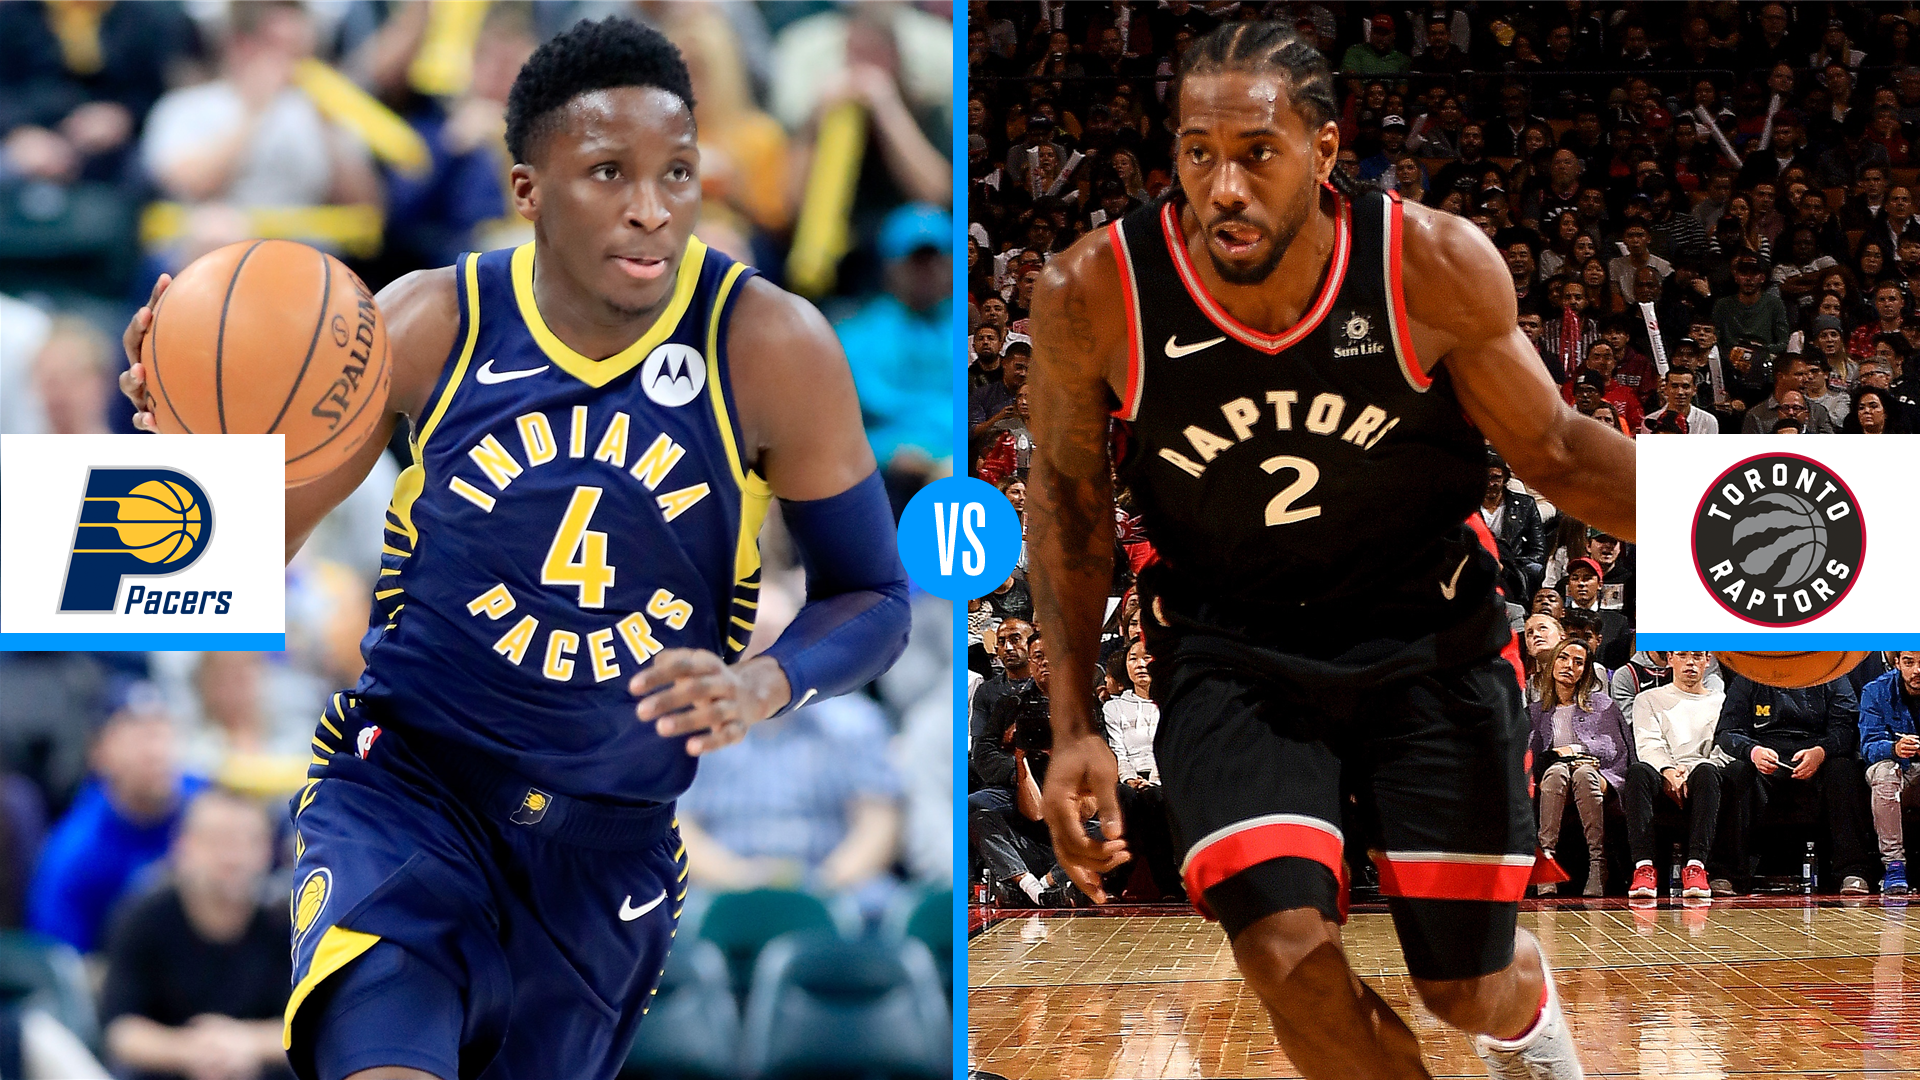 Indiana Pacers vs Toronto Raptors: Game preview, live stream, TV channel, start time ...1920 x 1080